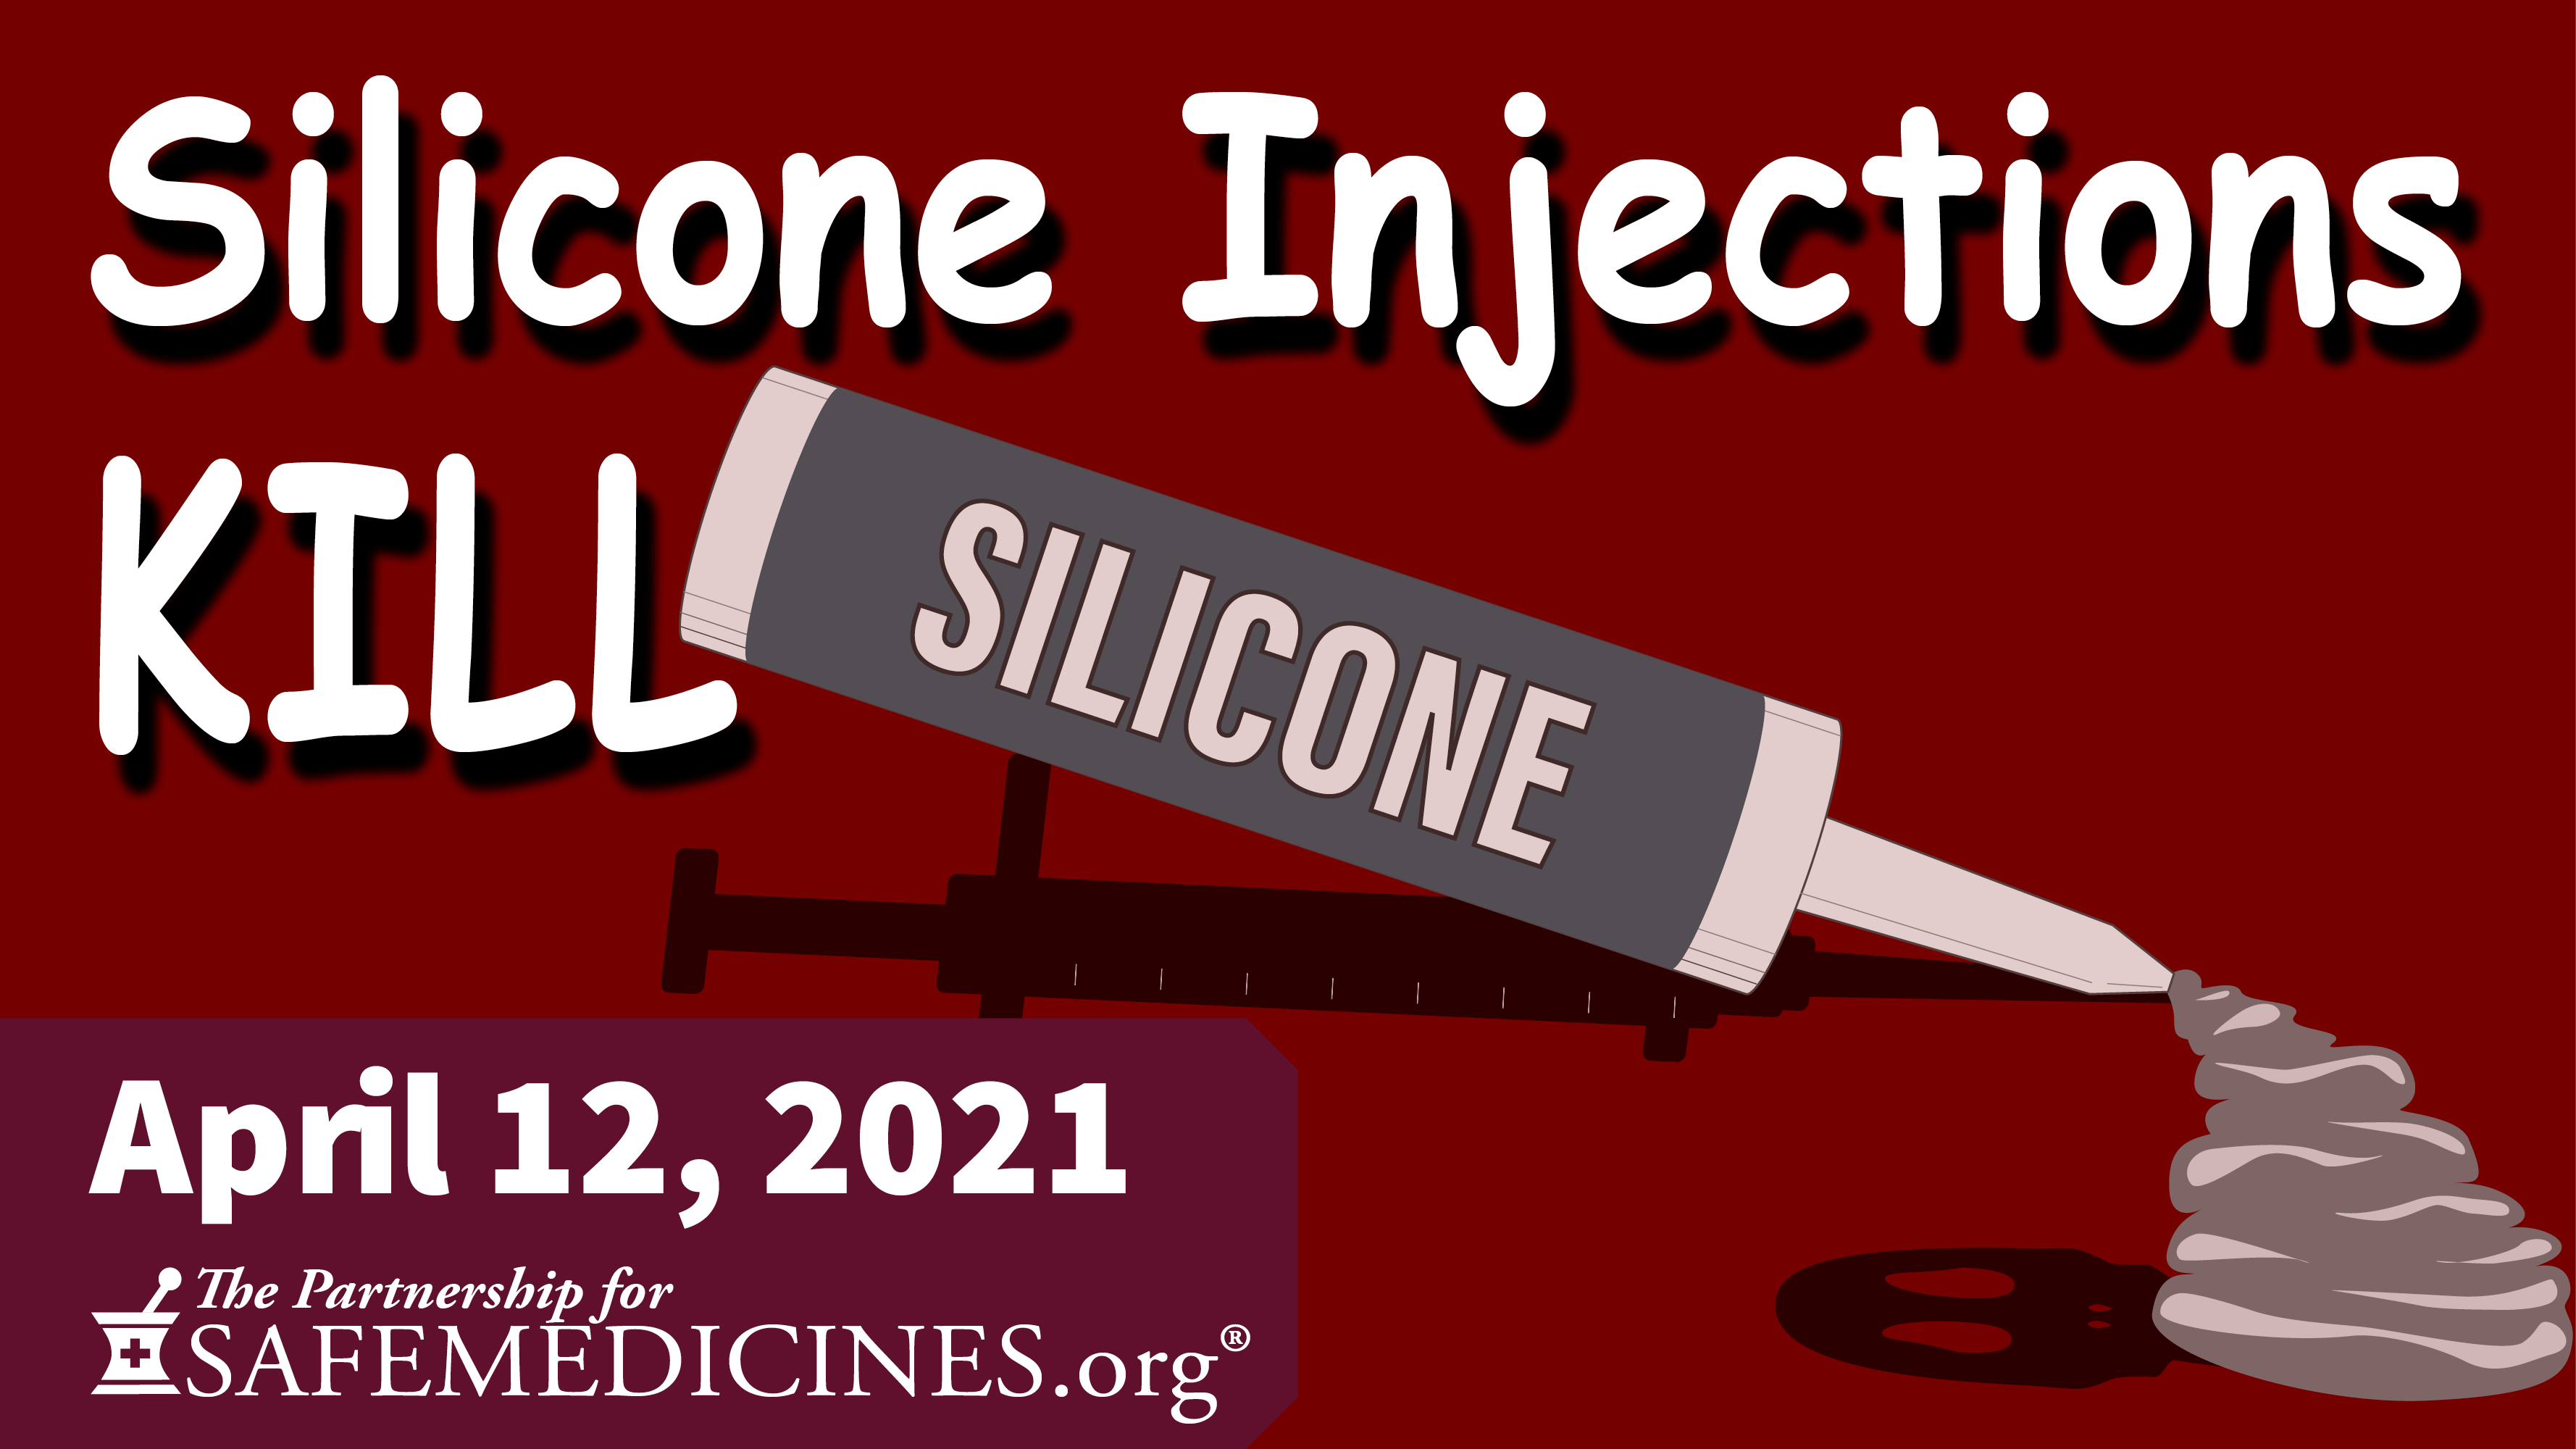 Silicone Injections Kill